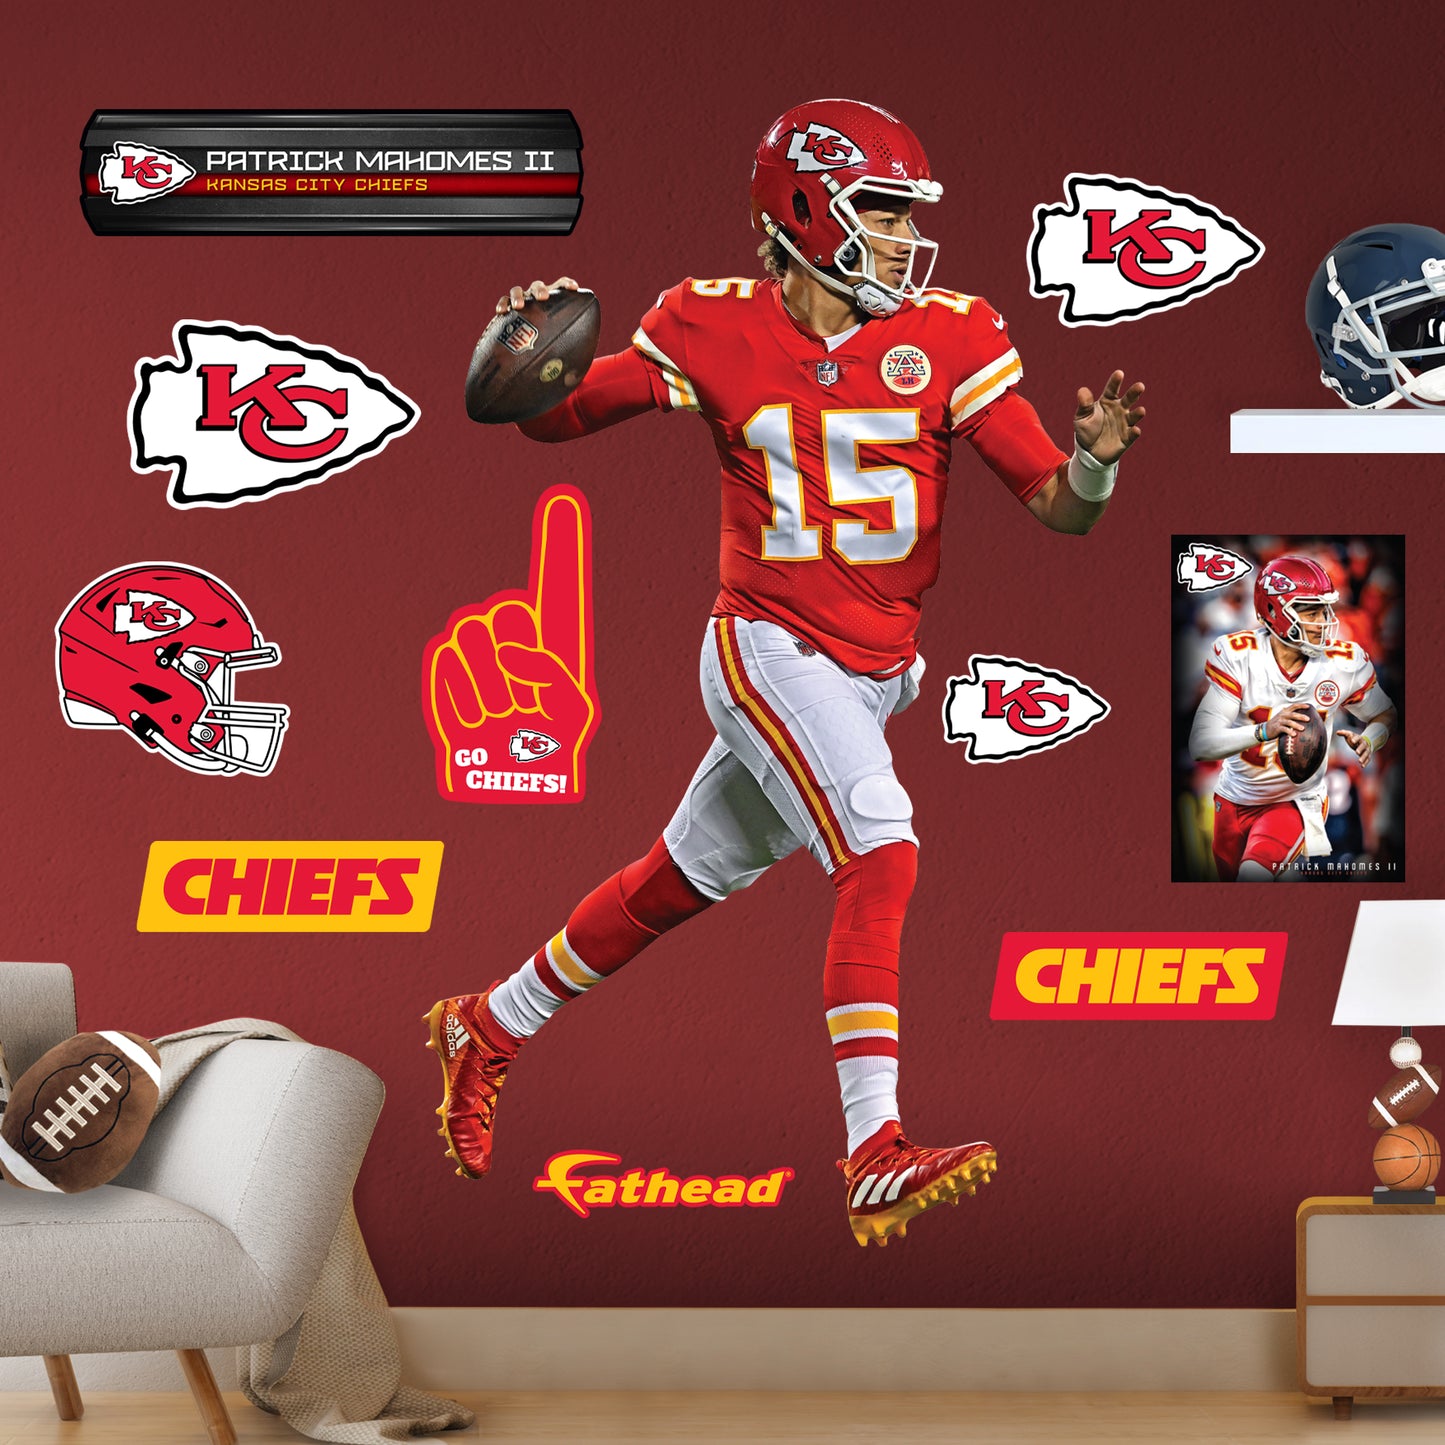 Kansas City Chiefs: Patrick Mahomes II         - Officially Licensed NFL Removable     Adhesive Decal